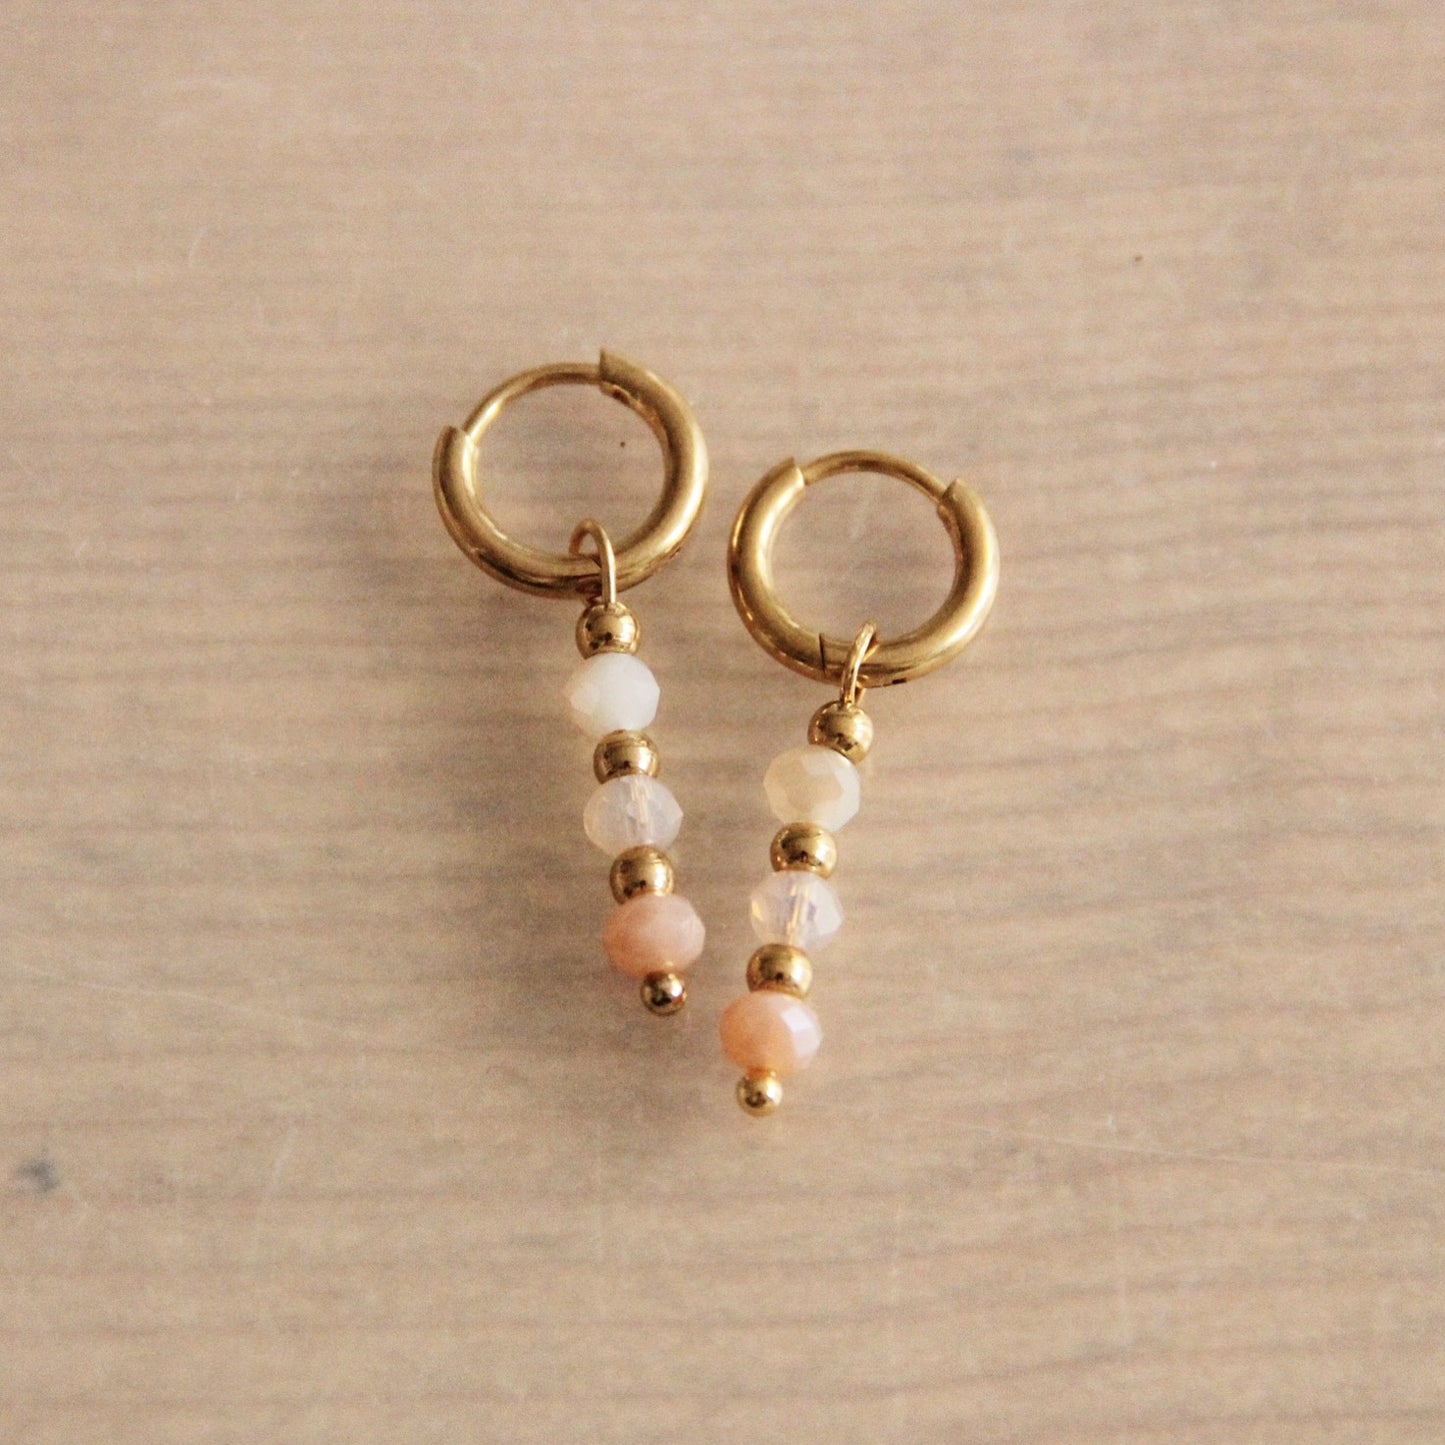 Stainless steel earrings with facets  - Nude - CB382